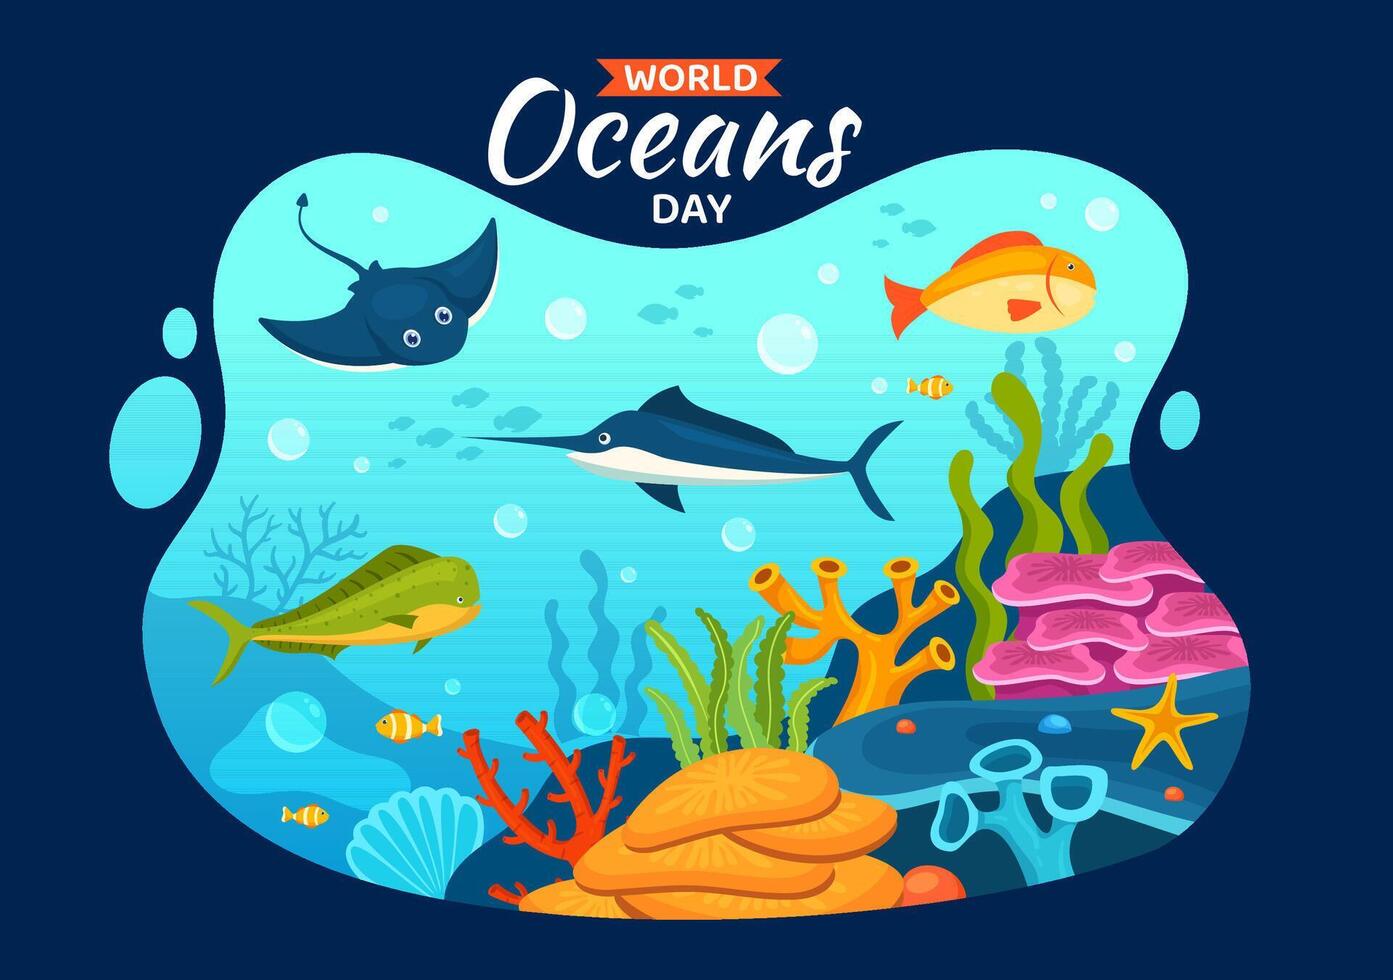 World Oceans Day Vector Illustration to Help Protect and Conserve Ocean, Fish, Ecosystem or Sea Plants in Flat Cartoon Background Design